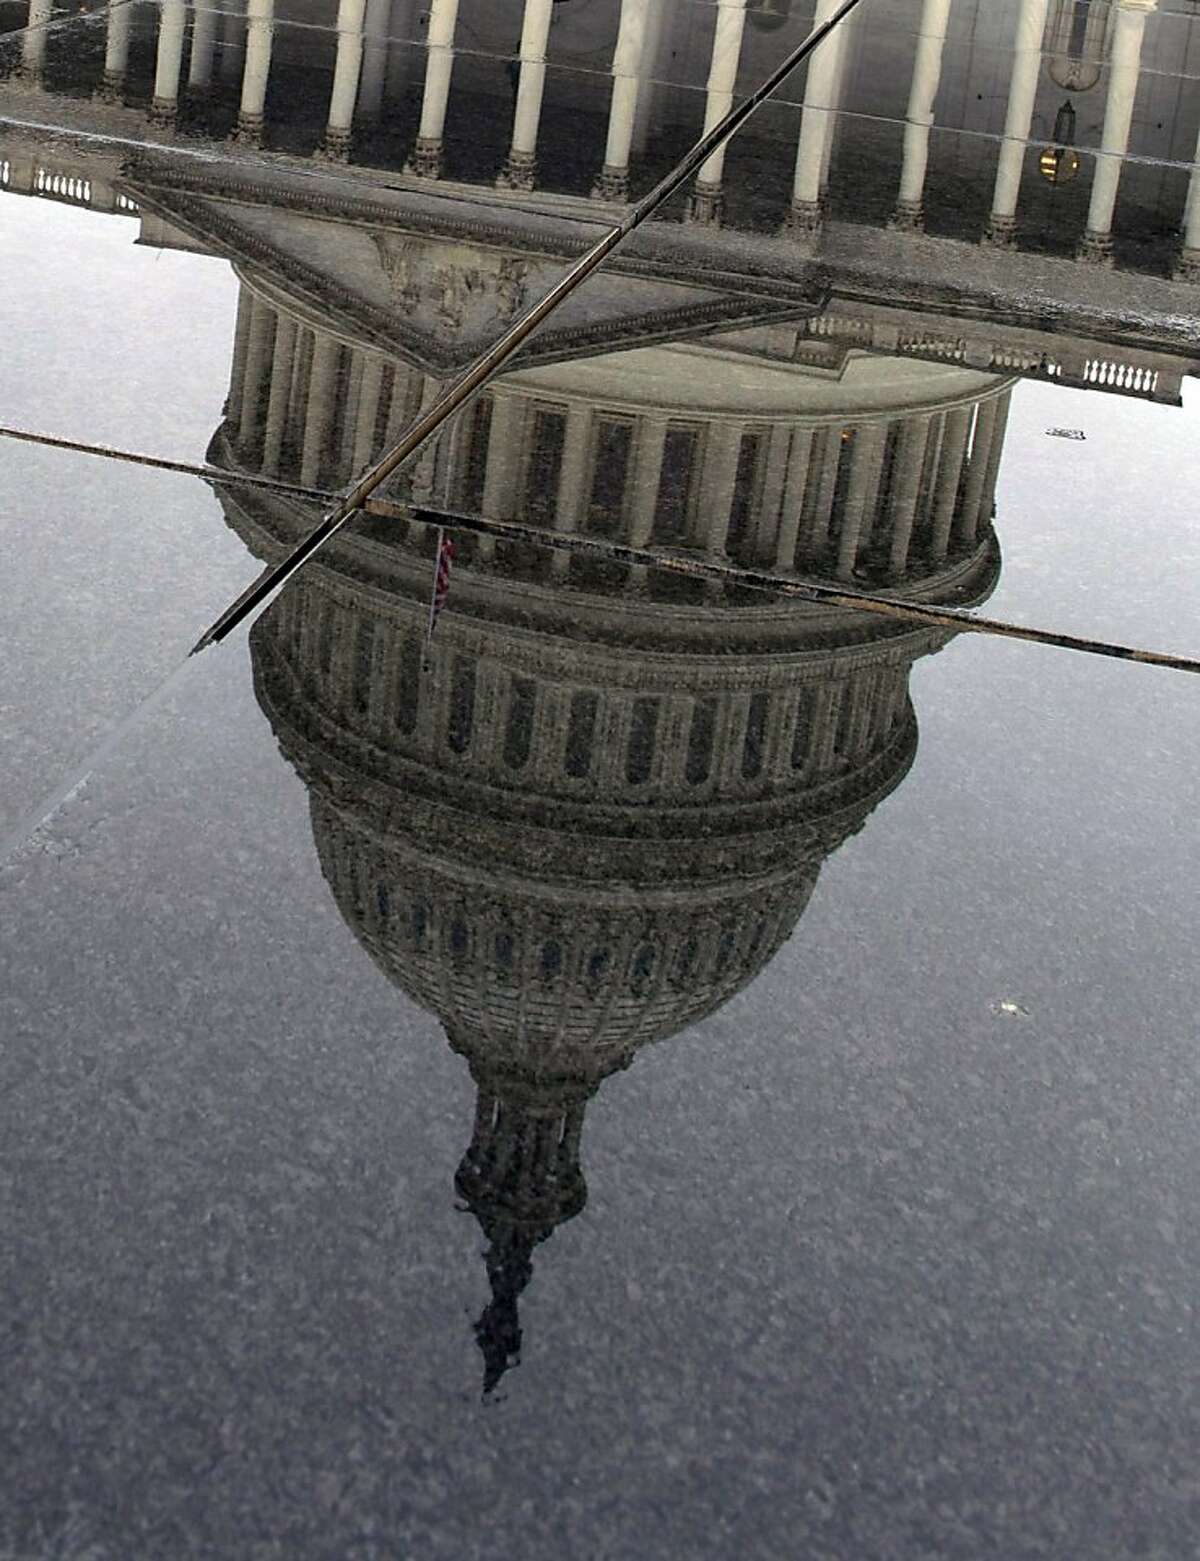 The US Capitol is reflected in rainwater on Capitol Hill in Washington, DC on December 29, 2012. As the fiscal cliff deadline looms, Congress and the White House have still not reached a compromise. If no deal is struck by December 31 at midnight, taxes will automatically go up on both high earners and the middle class, and across-the-board spending cuts will go into effect. AFP PHOTO/Karen BLEIERKAREN BLEIER/AFP/Getty Images